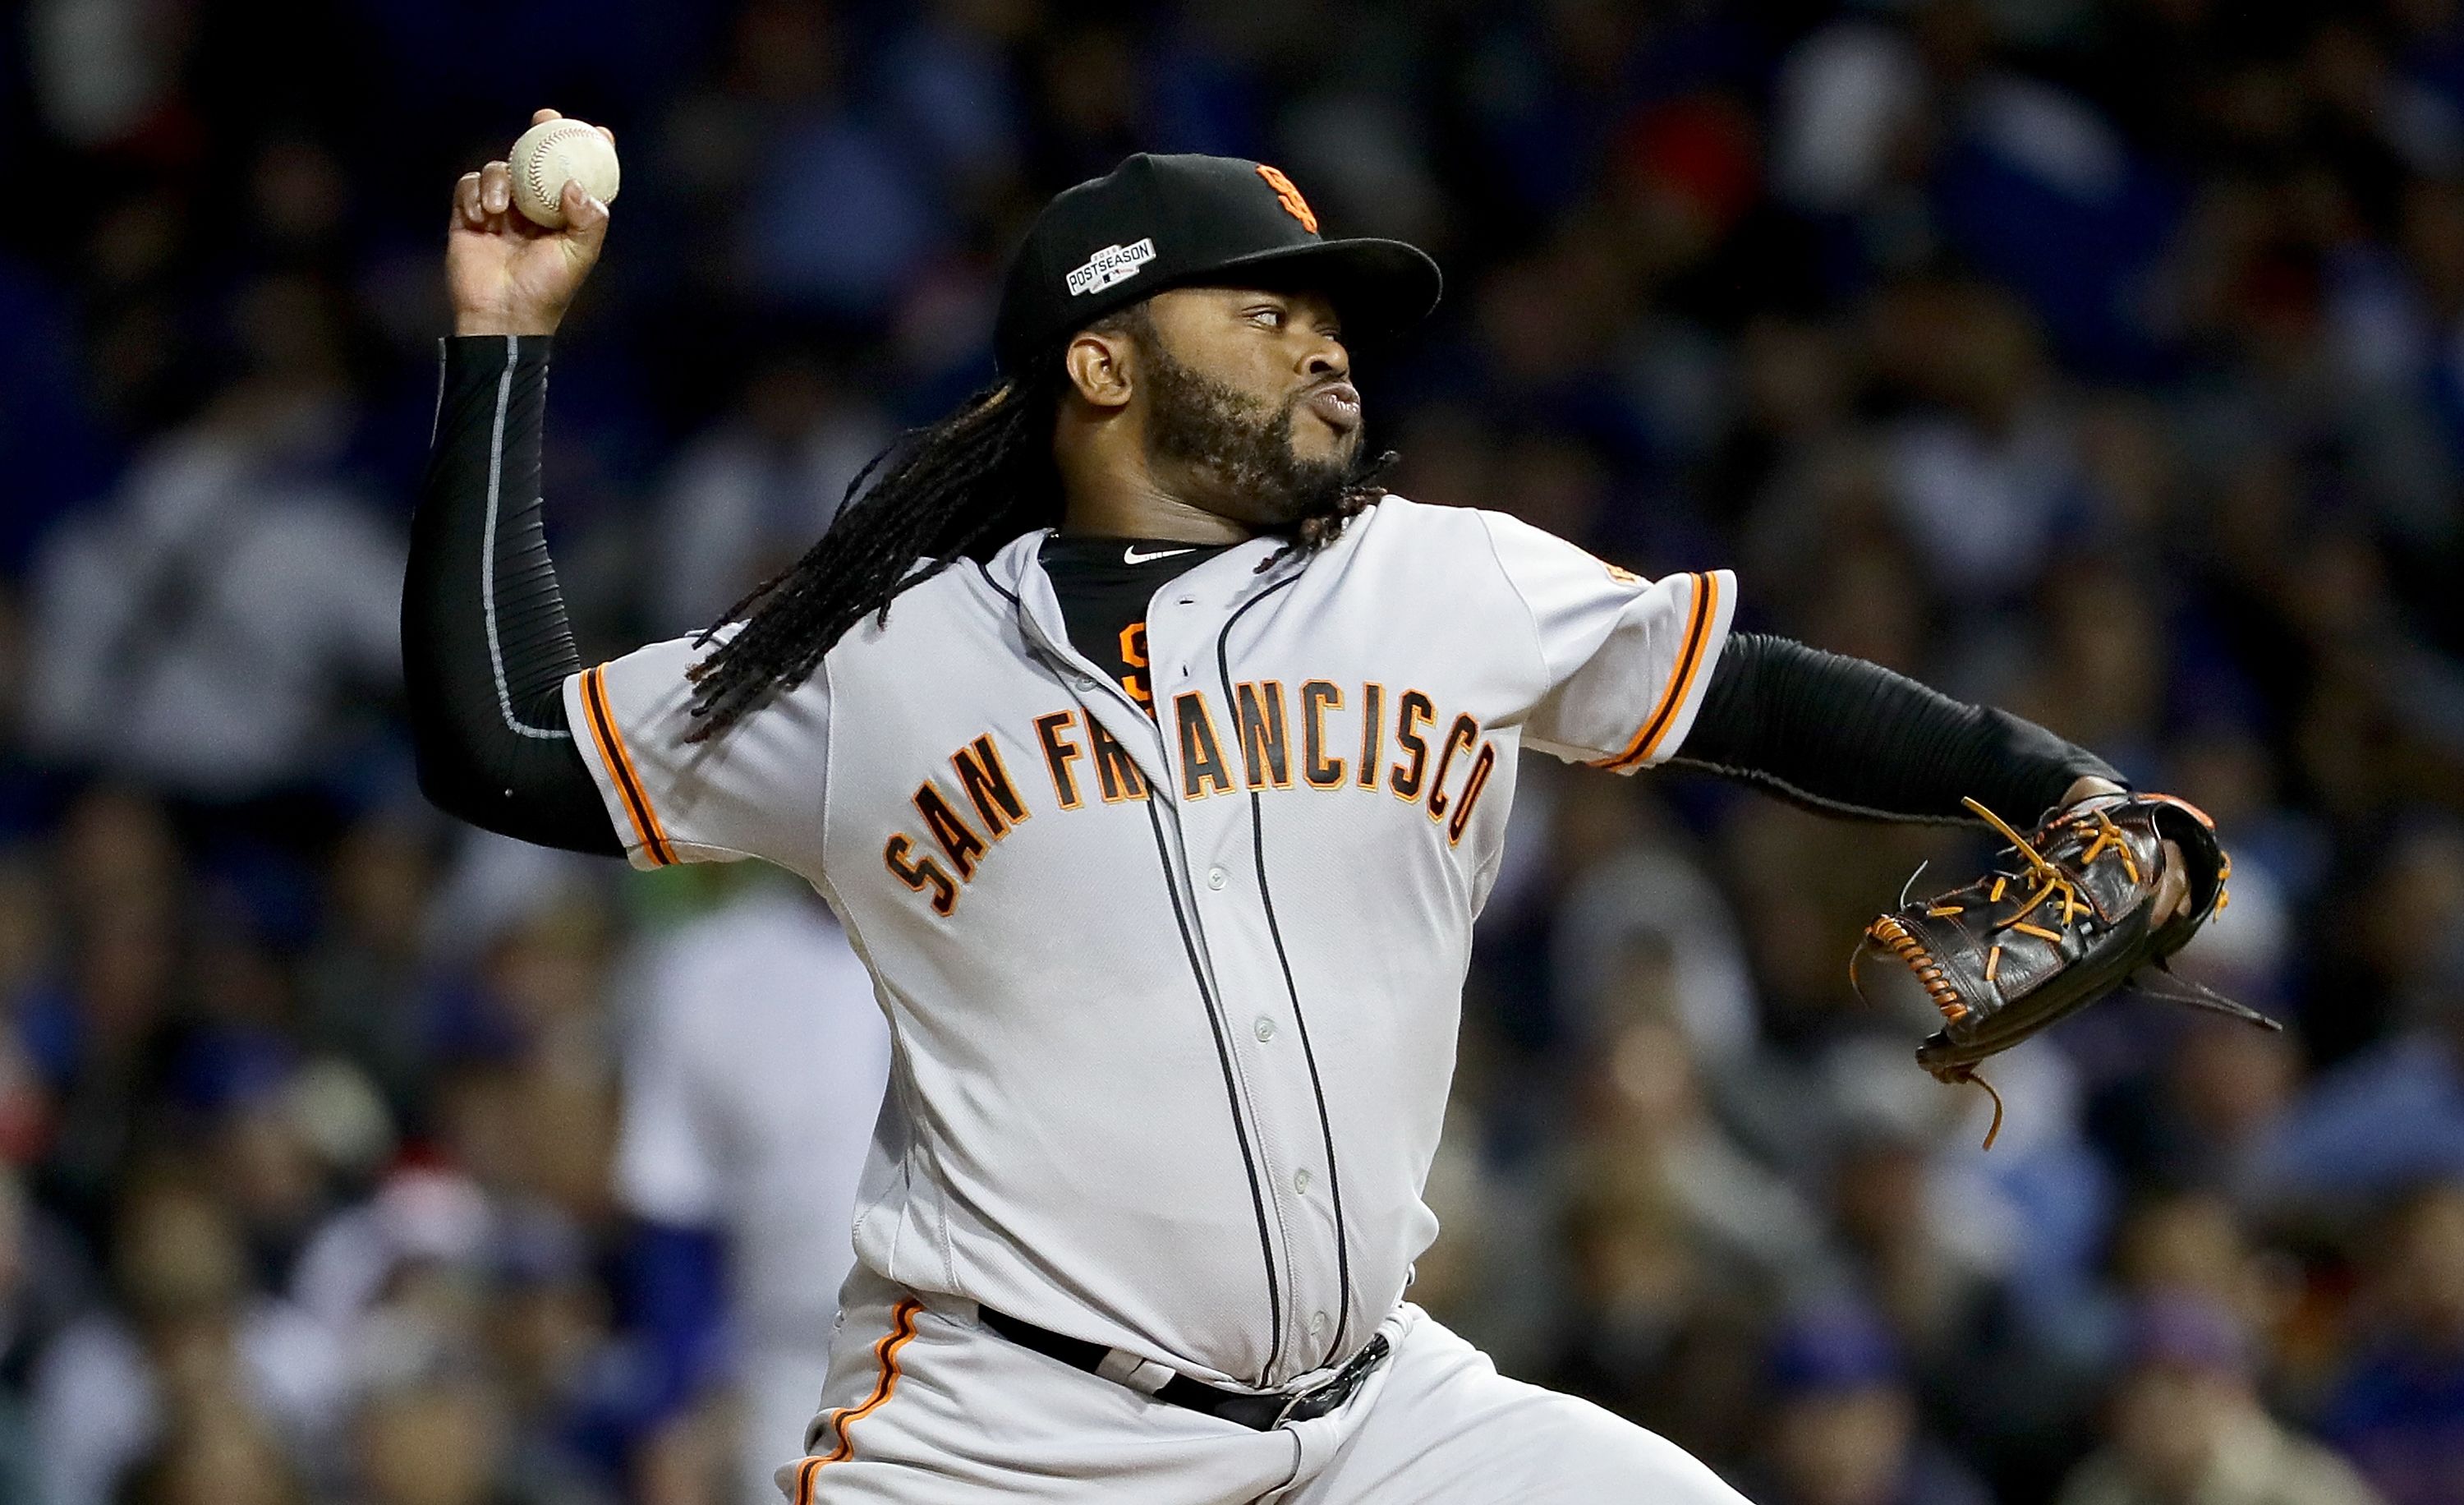 Johnny Cueto contract: Marlins sign a pitcher, which means trade